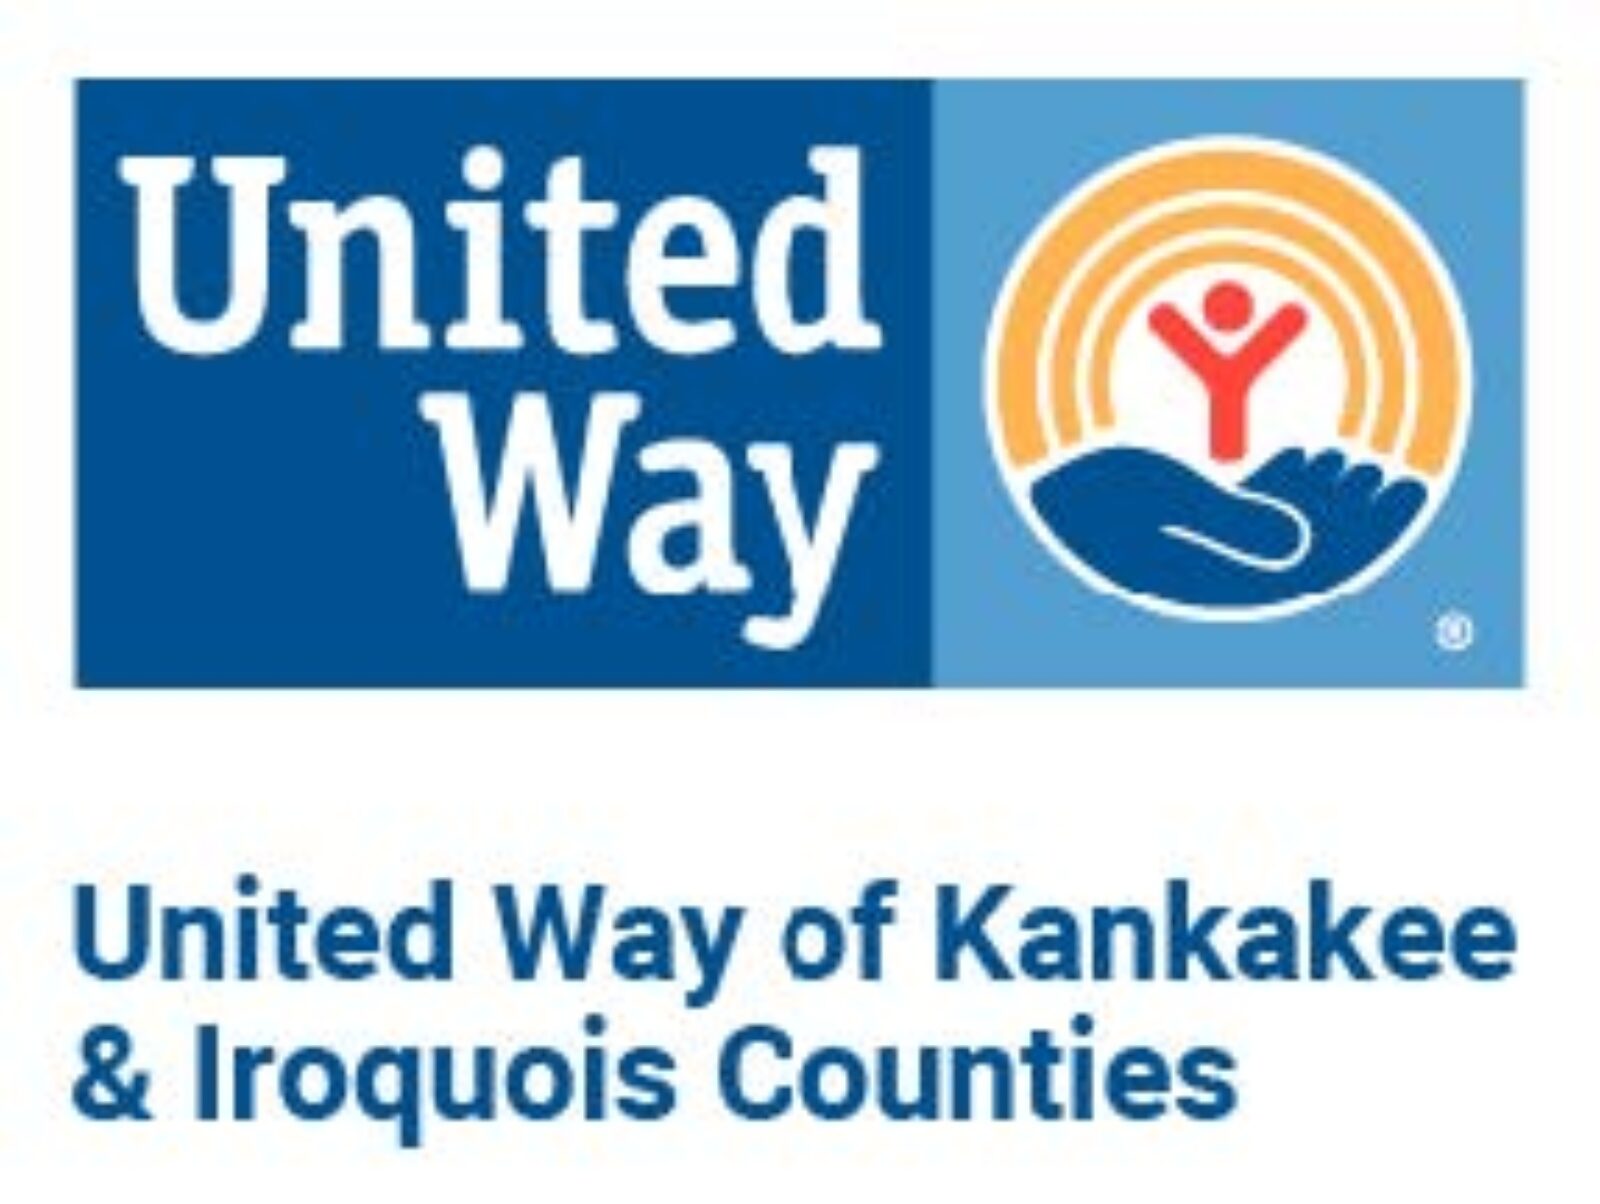 United Way: We need your support, Riverside Employees!